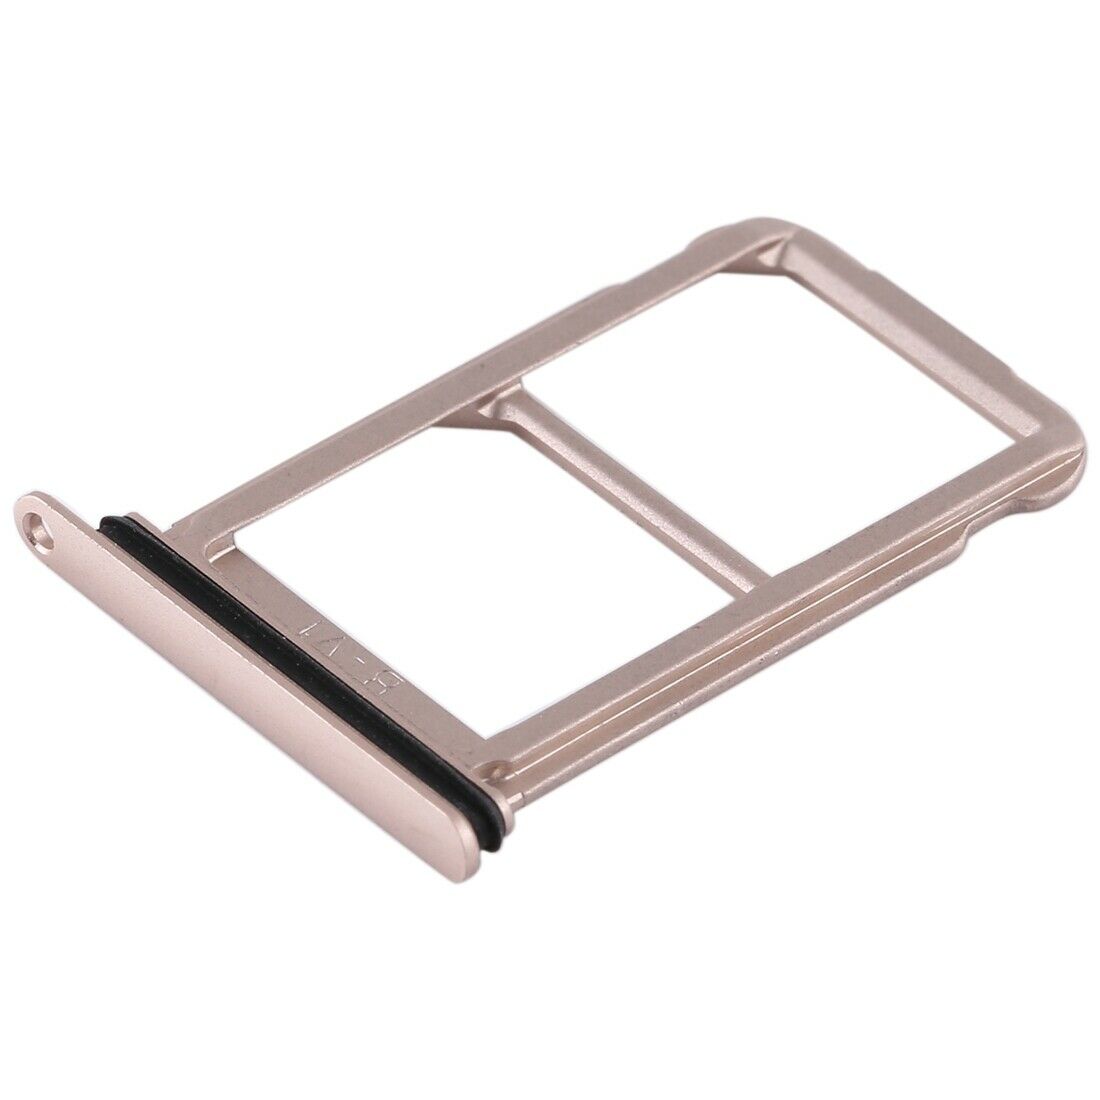 Huawei P20 Dual SIM Card Holder Tray Slot Gold & Waterproof Seal for [product_price] - First Help Tech